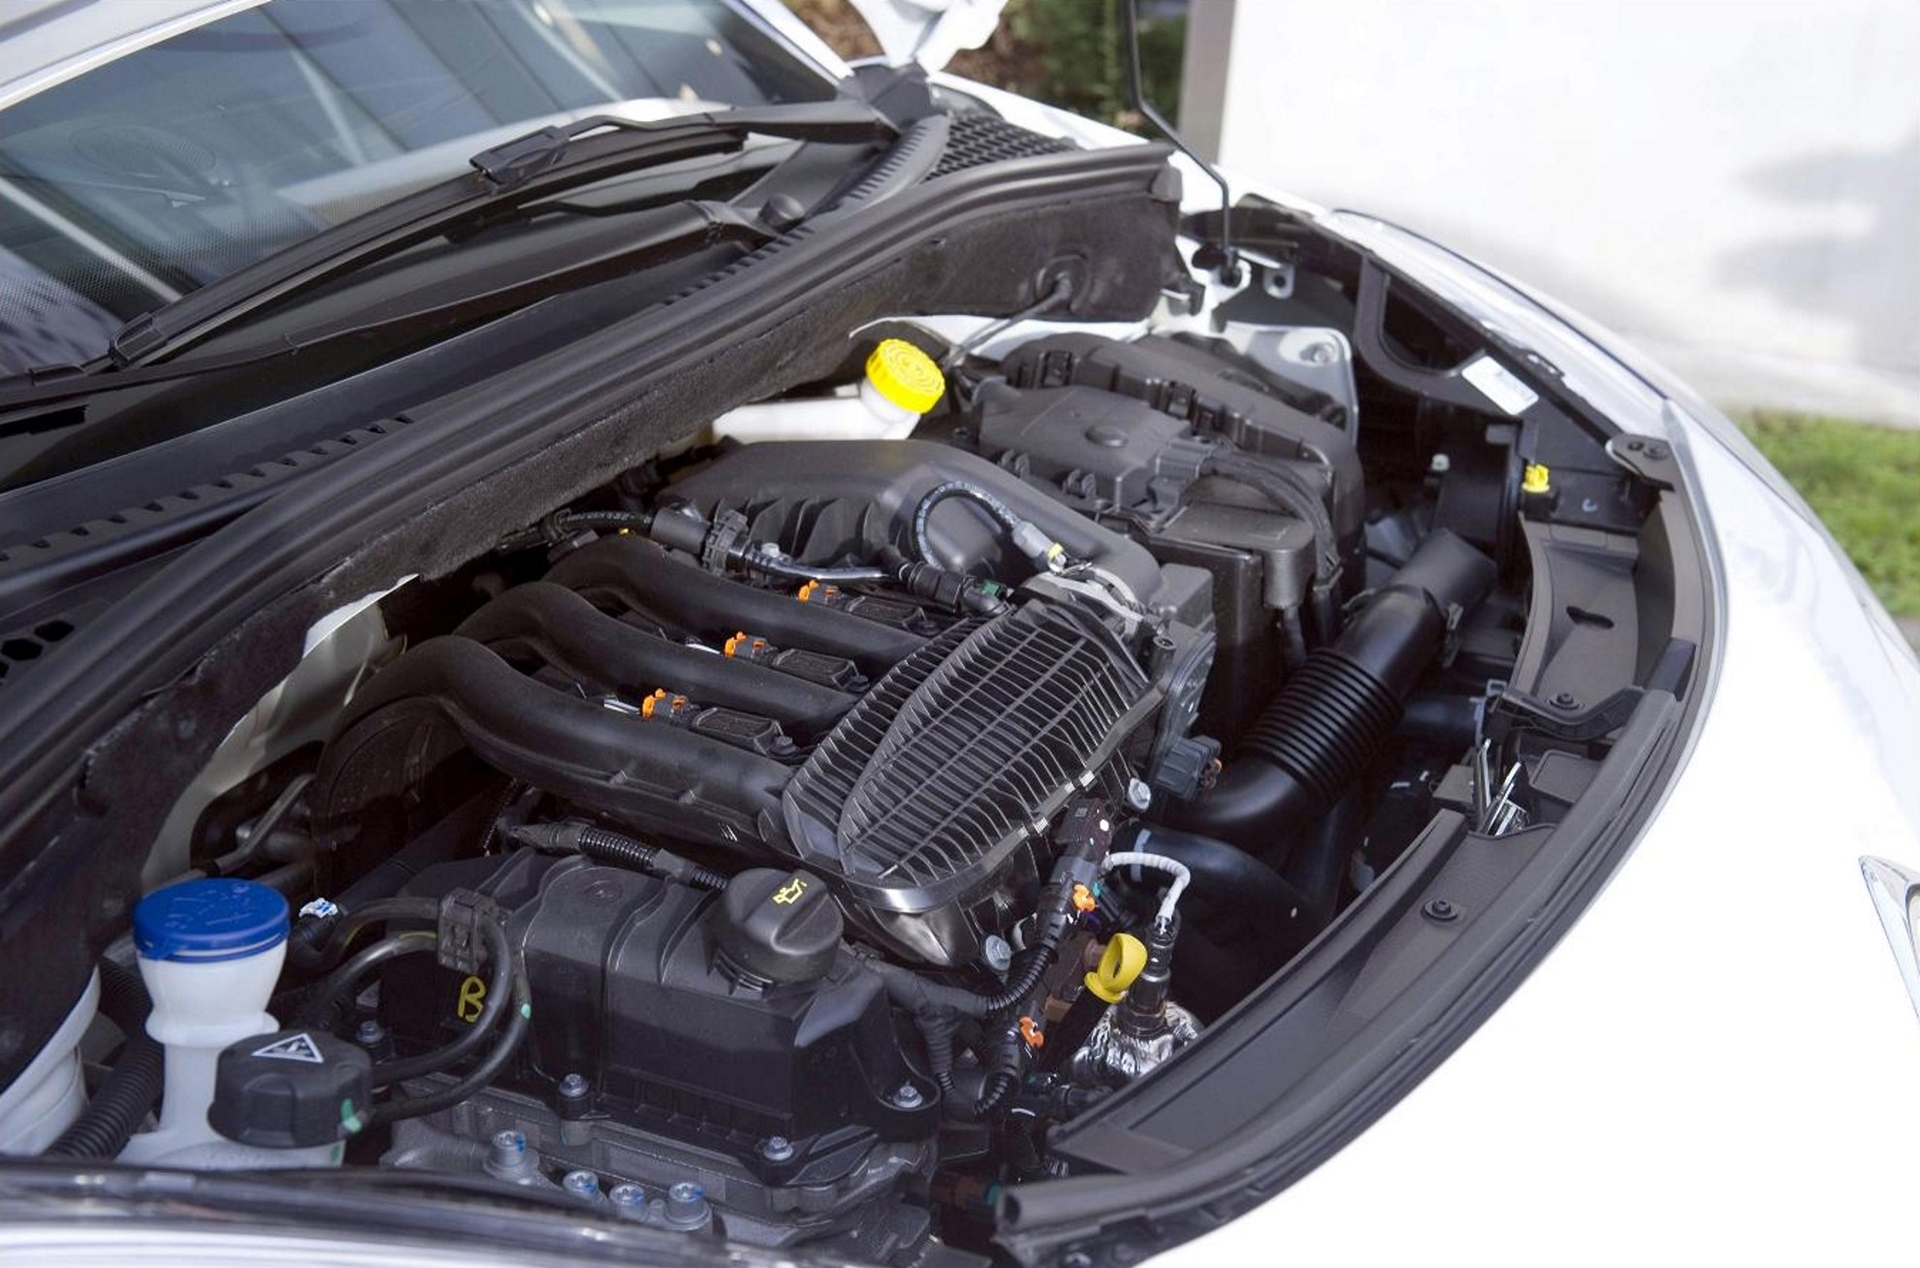 CITROËN TAKES ANOTHER STEP FORWARD WITH NEW PURETECH ENGINES